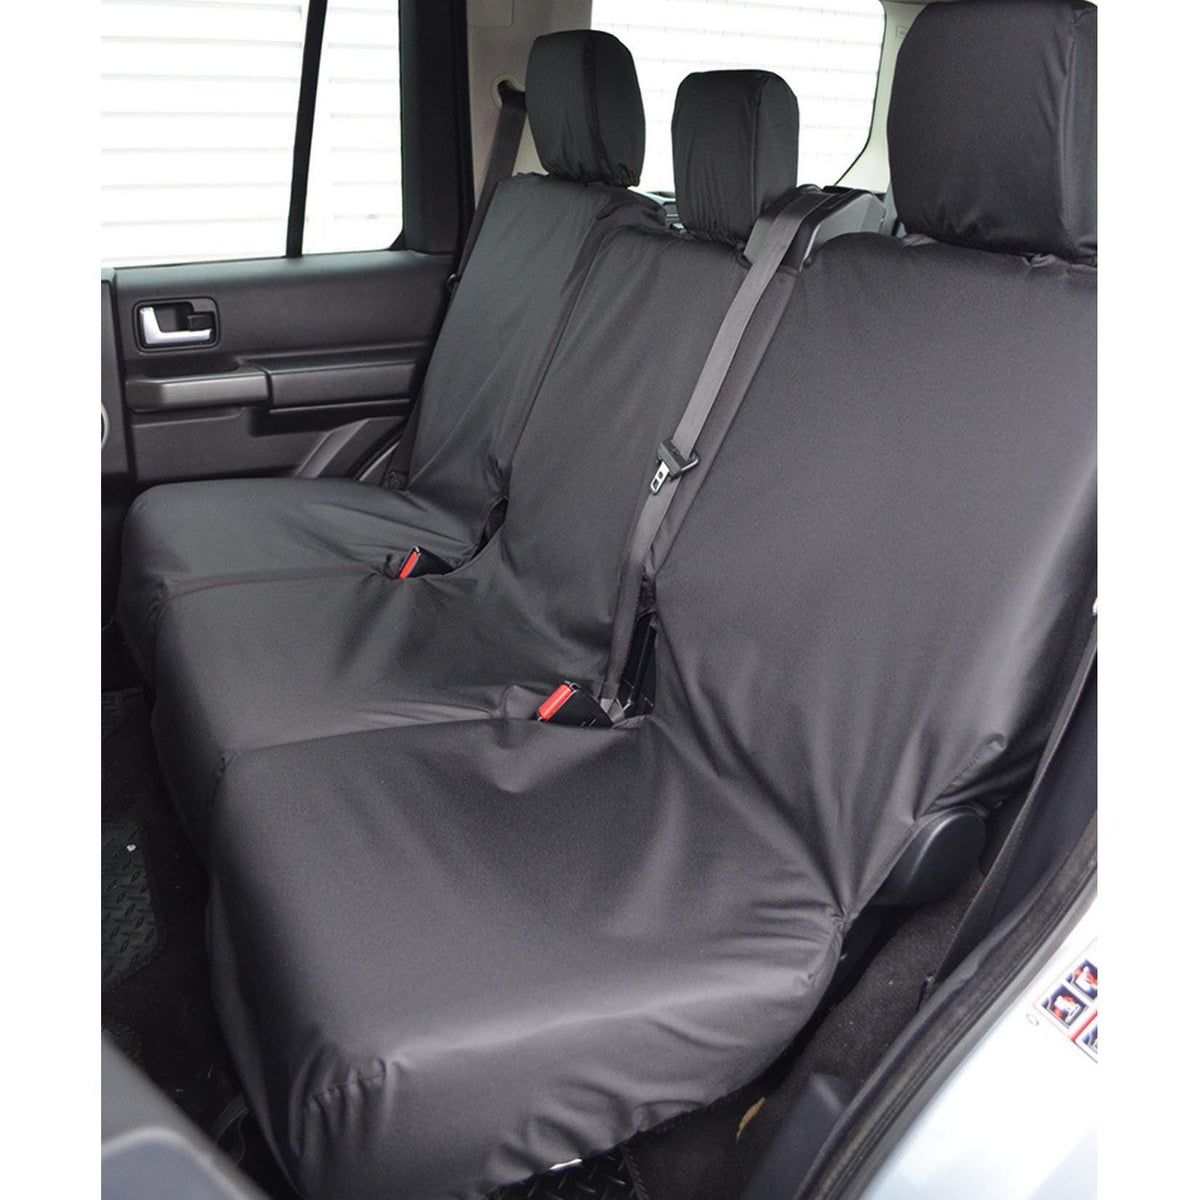 LAND ROVER DISCOVERY 3 4 REAR SEAT COVERS - BLACK - Storm Xccessories2